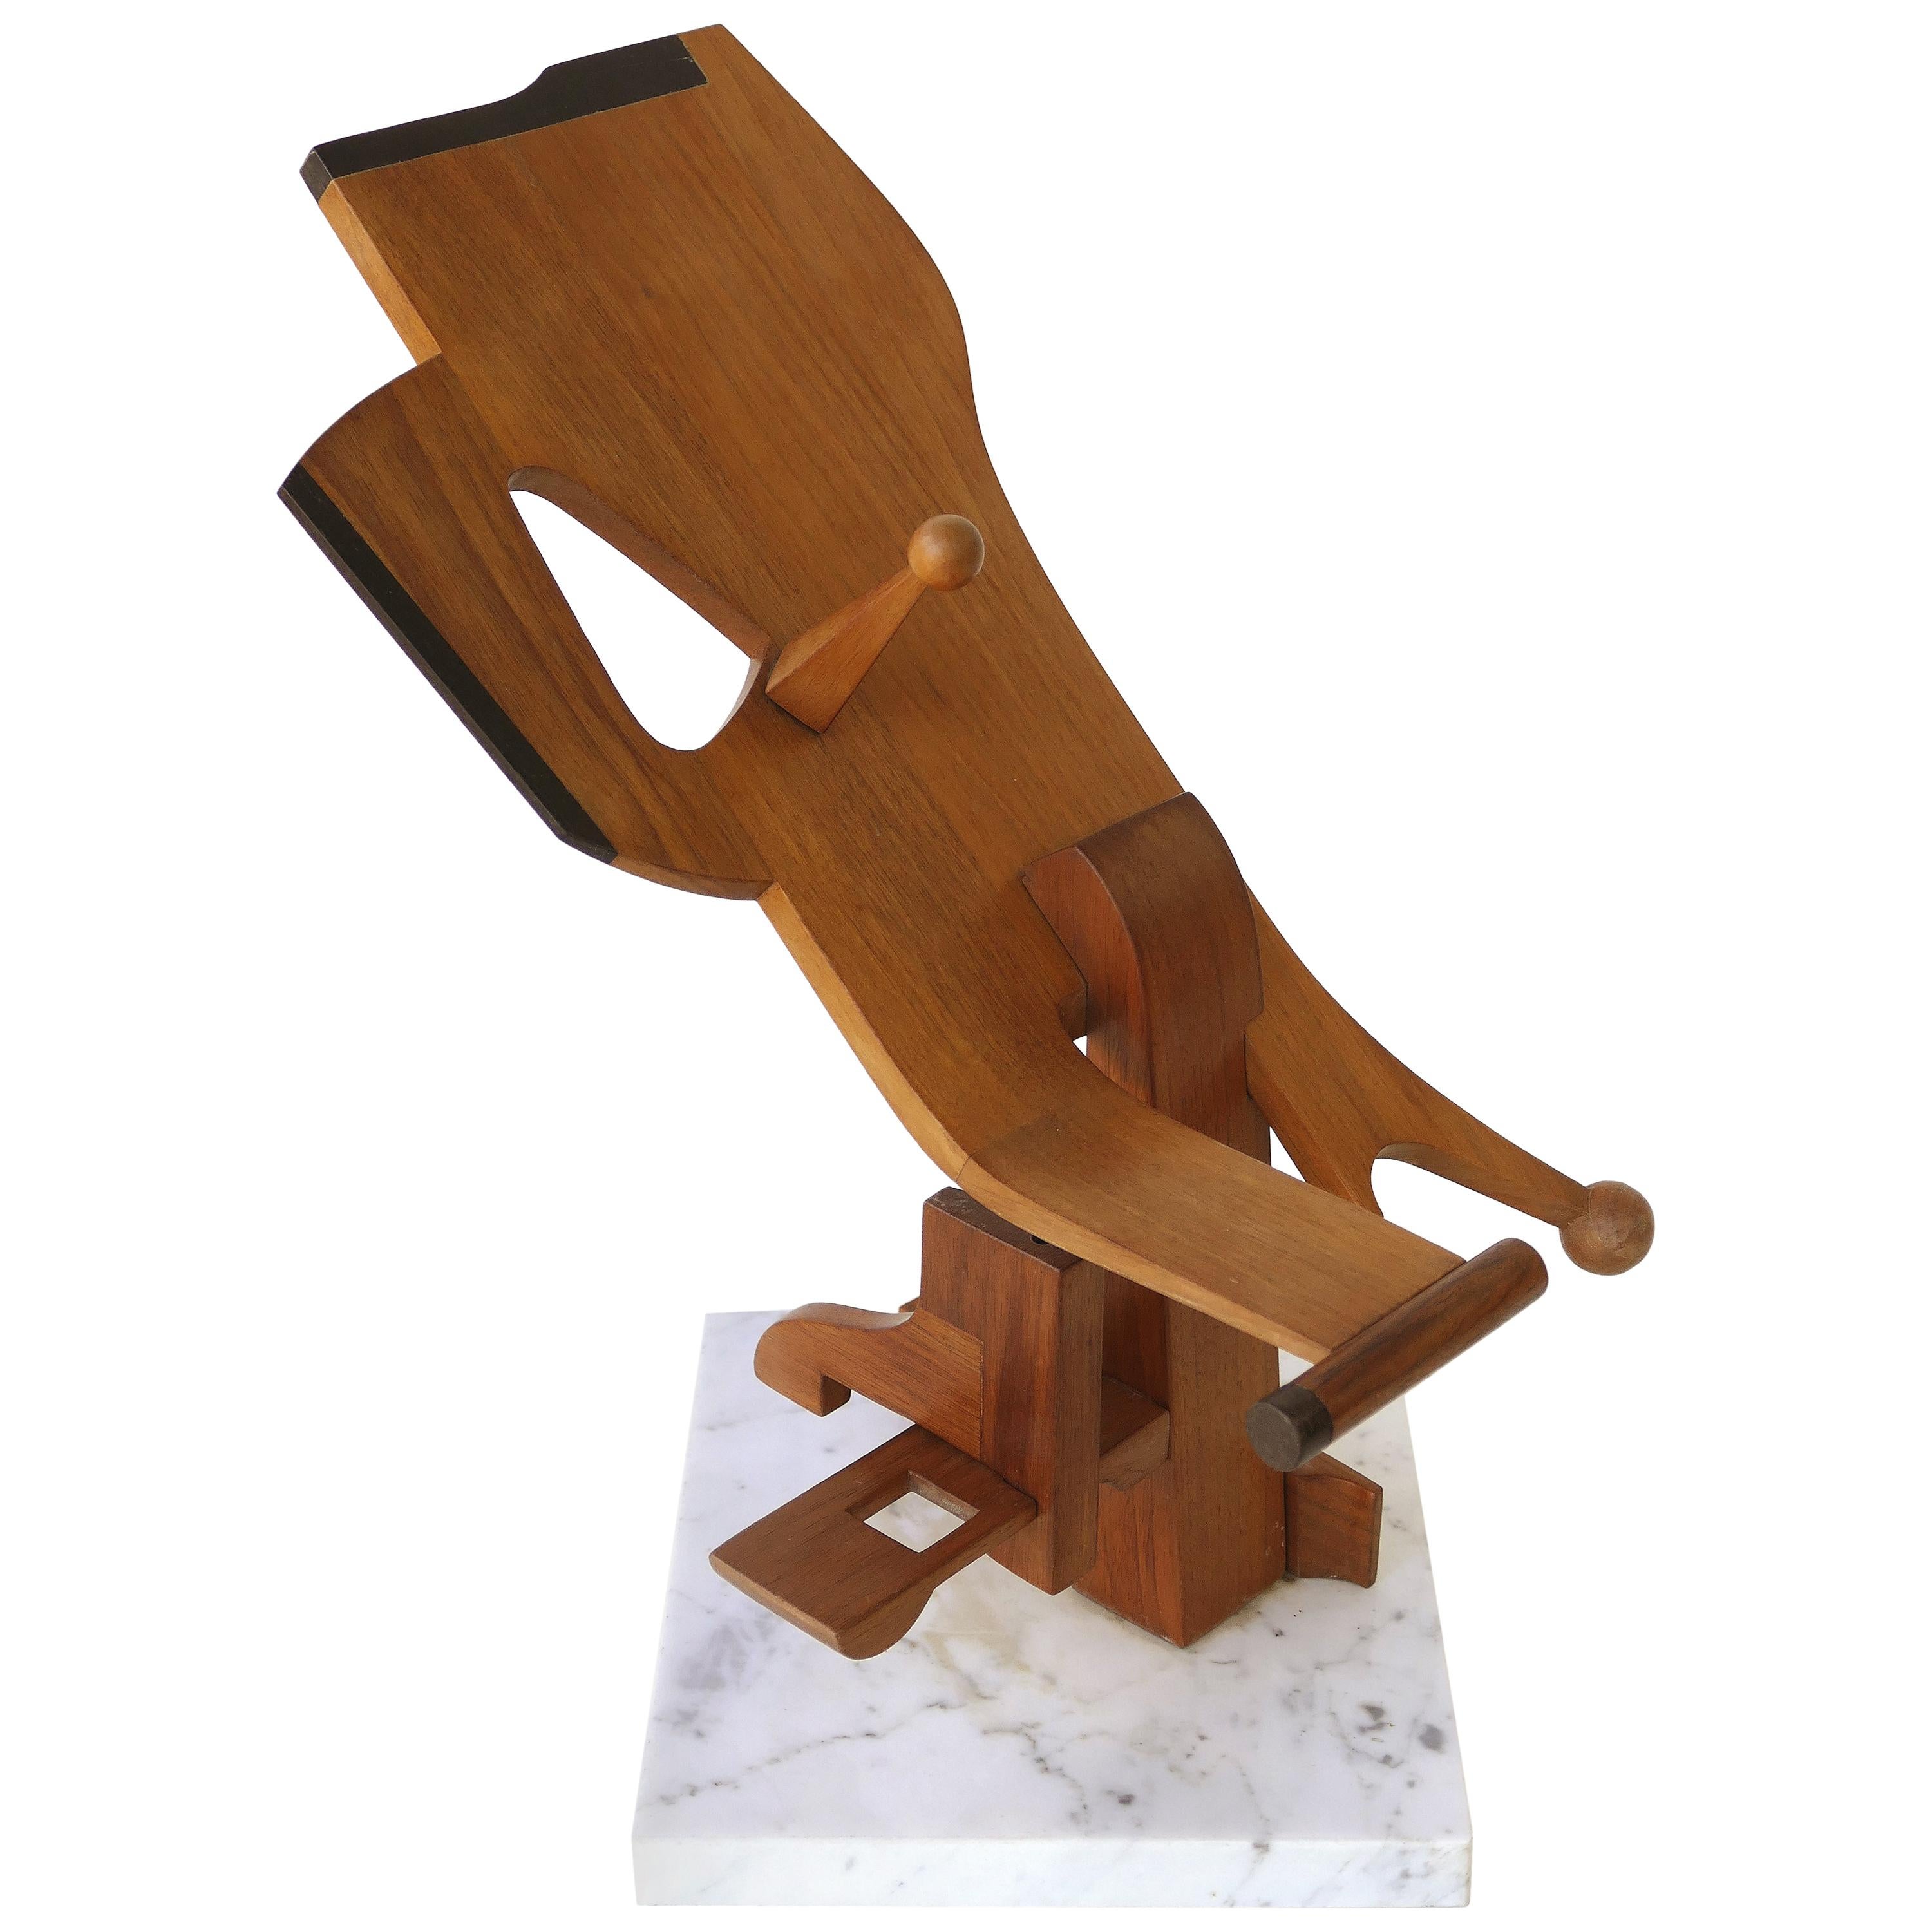 Abstract Wood Brutalist Sculpture, manner of Leo Amino